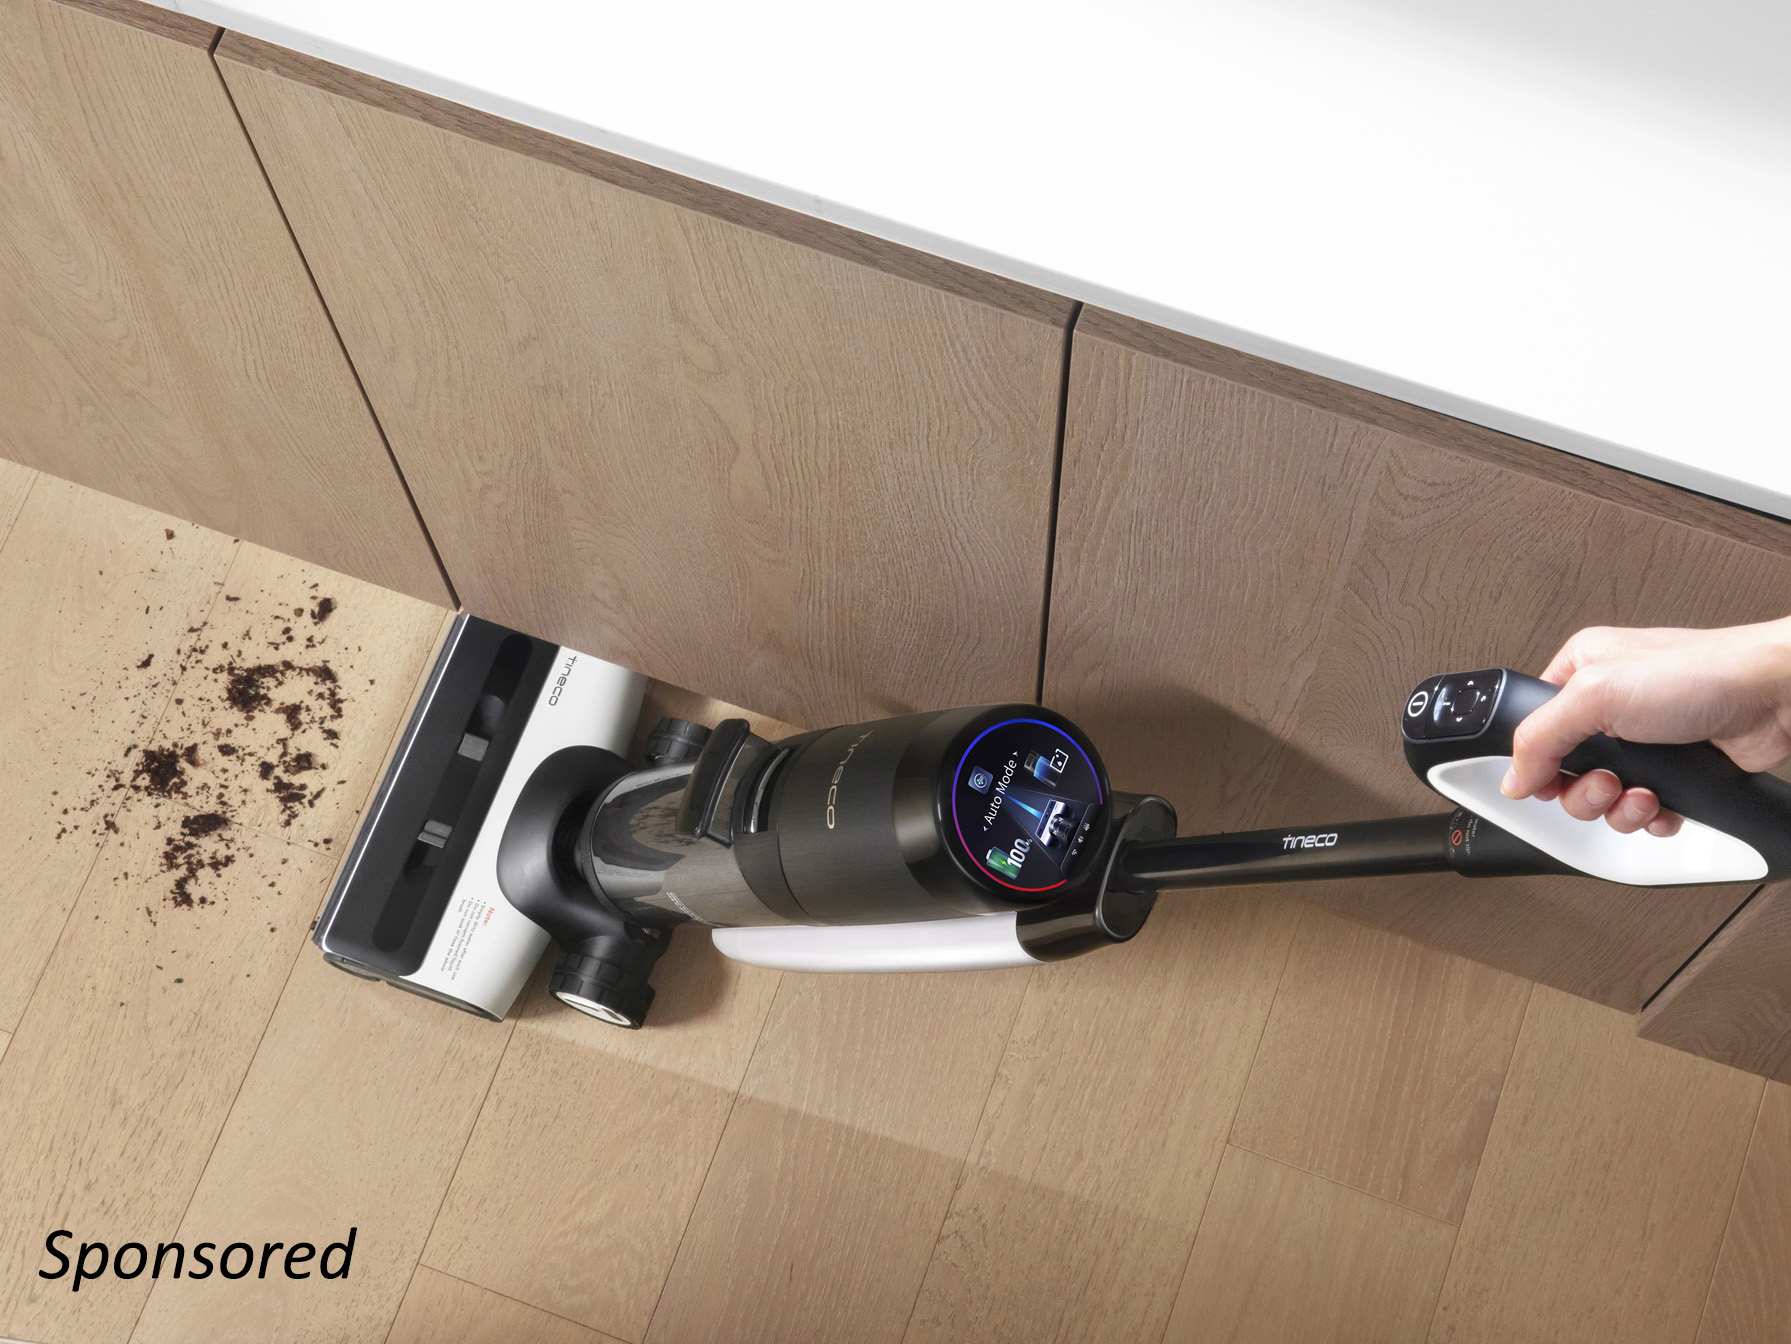 Tineco FLOOR ONE S7 PRO cleaning around baseboards sponsored